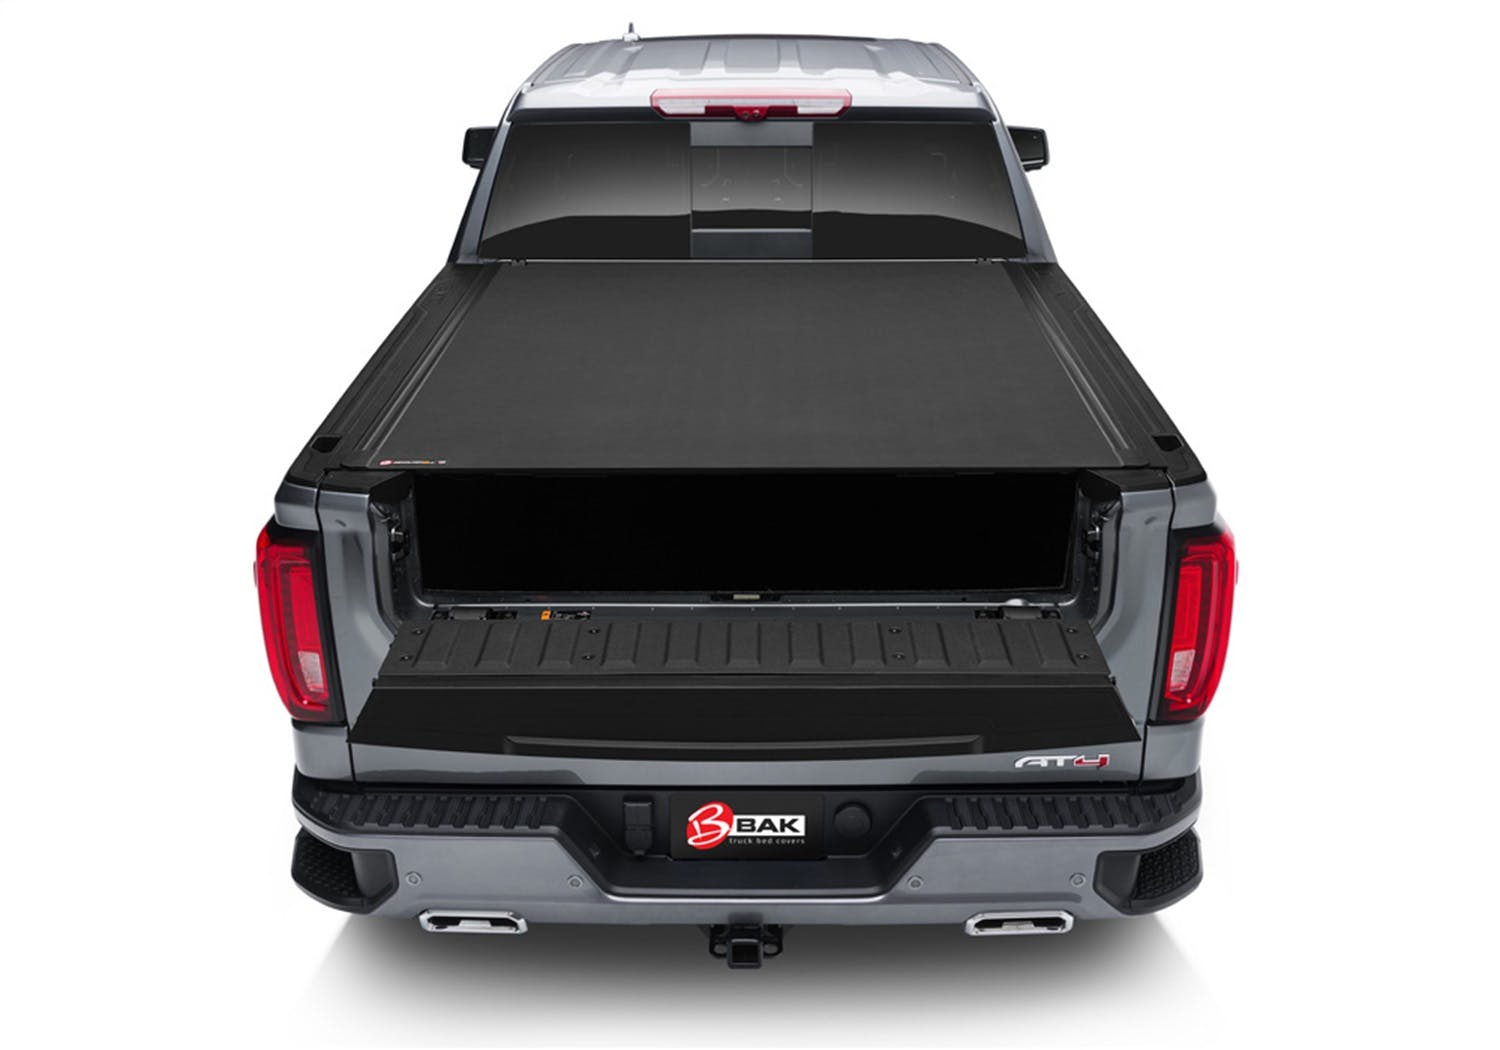 BAK Industries 80133 Revolver X4s Hard Rolling Truck Bed Cover